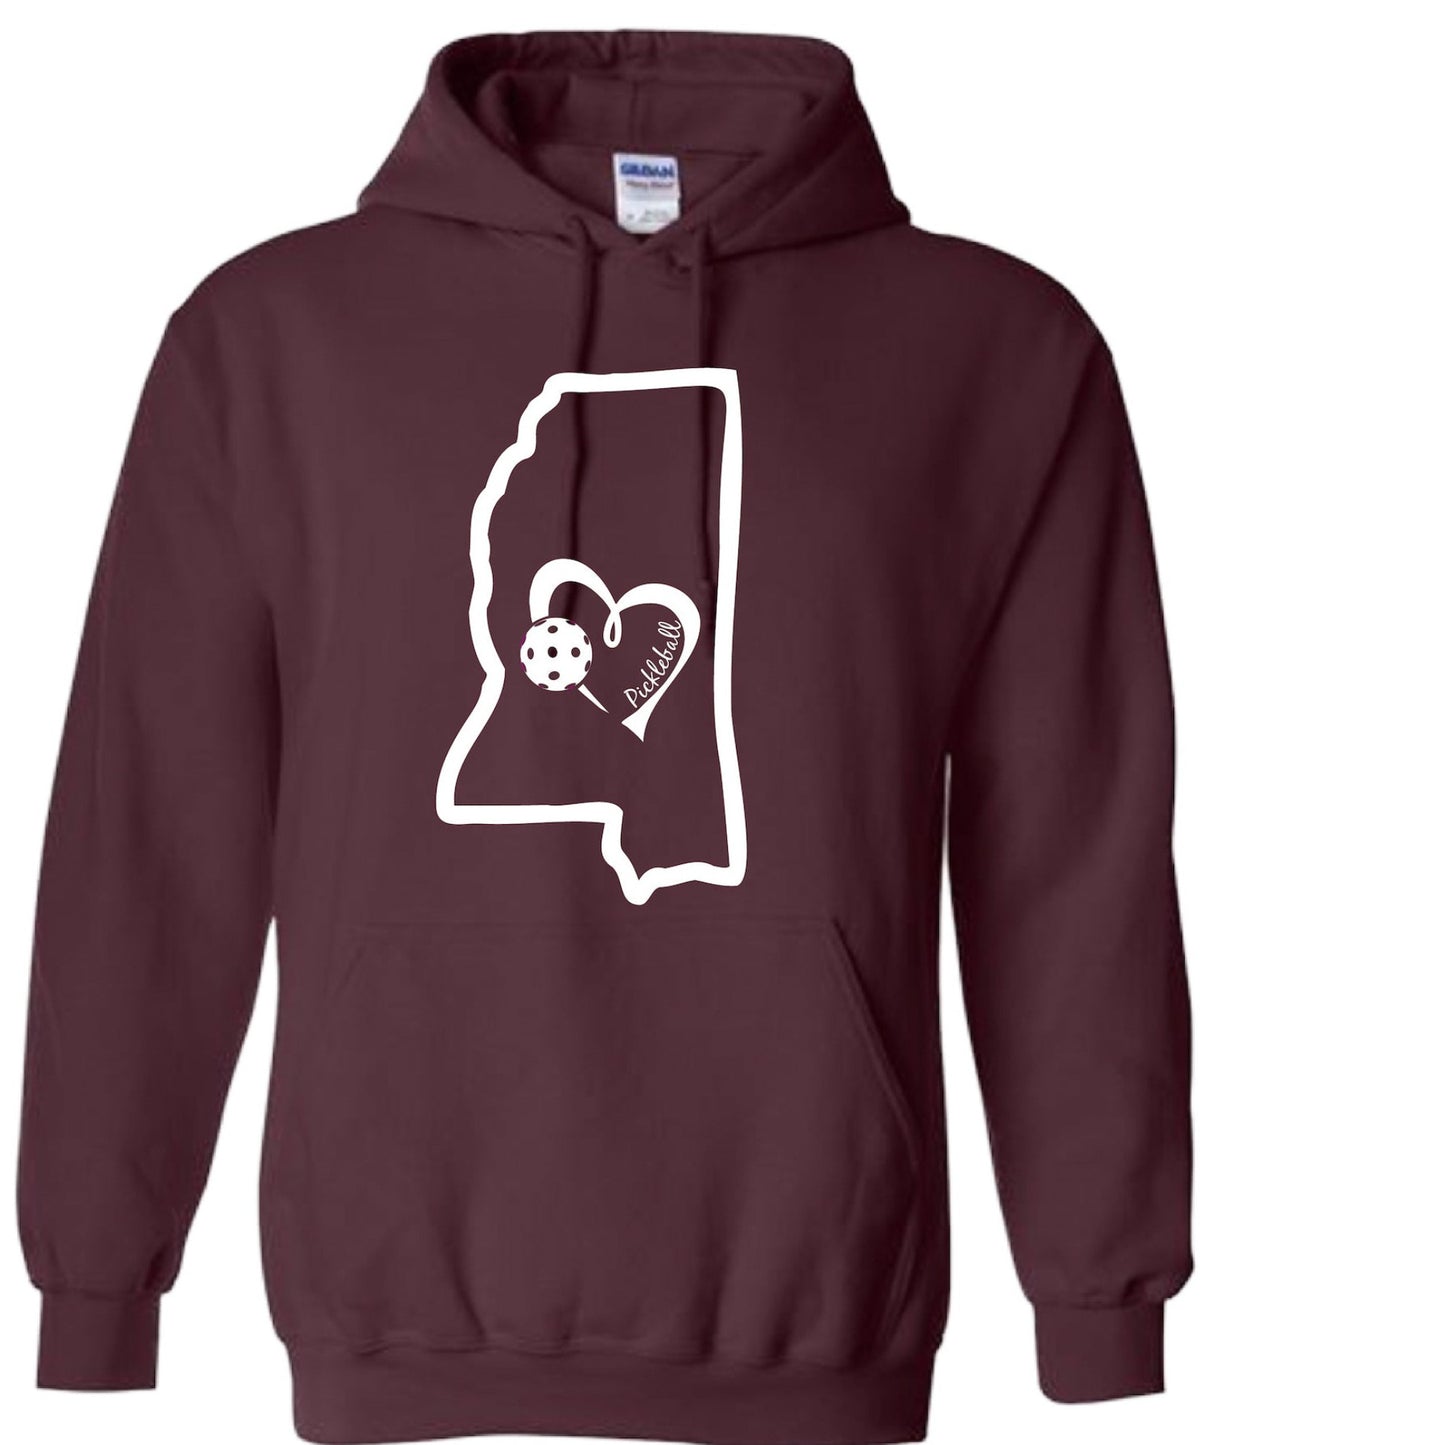 Pickleball Design: Mississippi State with Heart  Men's Styles: Unisex Hooded Sweatshirt  Shirts are lightweight, roomy and highly breathable. These moisture-wicking shirts are designed for athletic performance. They feature PosiCharge technology to lock in color and prevent logos from fading. Removable tag and set-in sleeves for comfort.